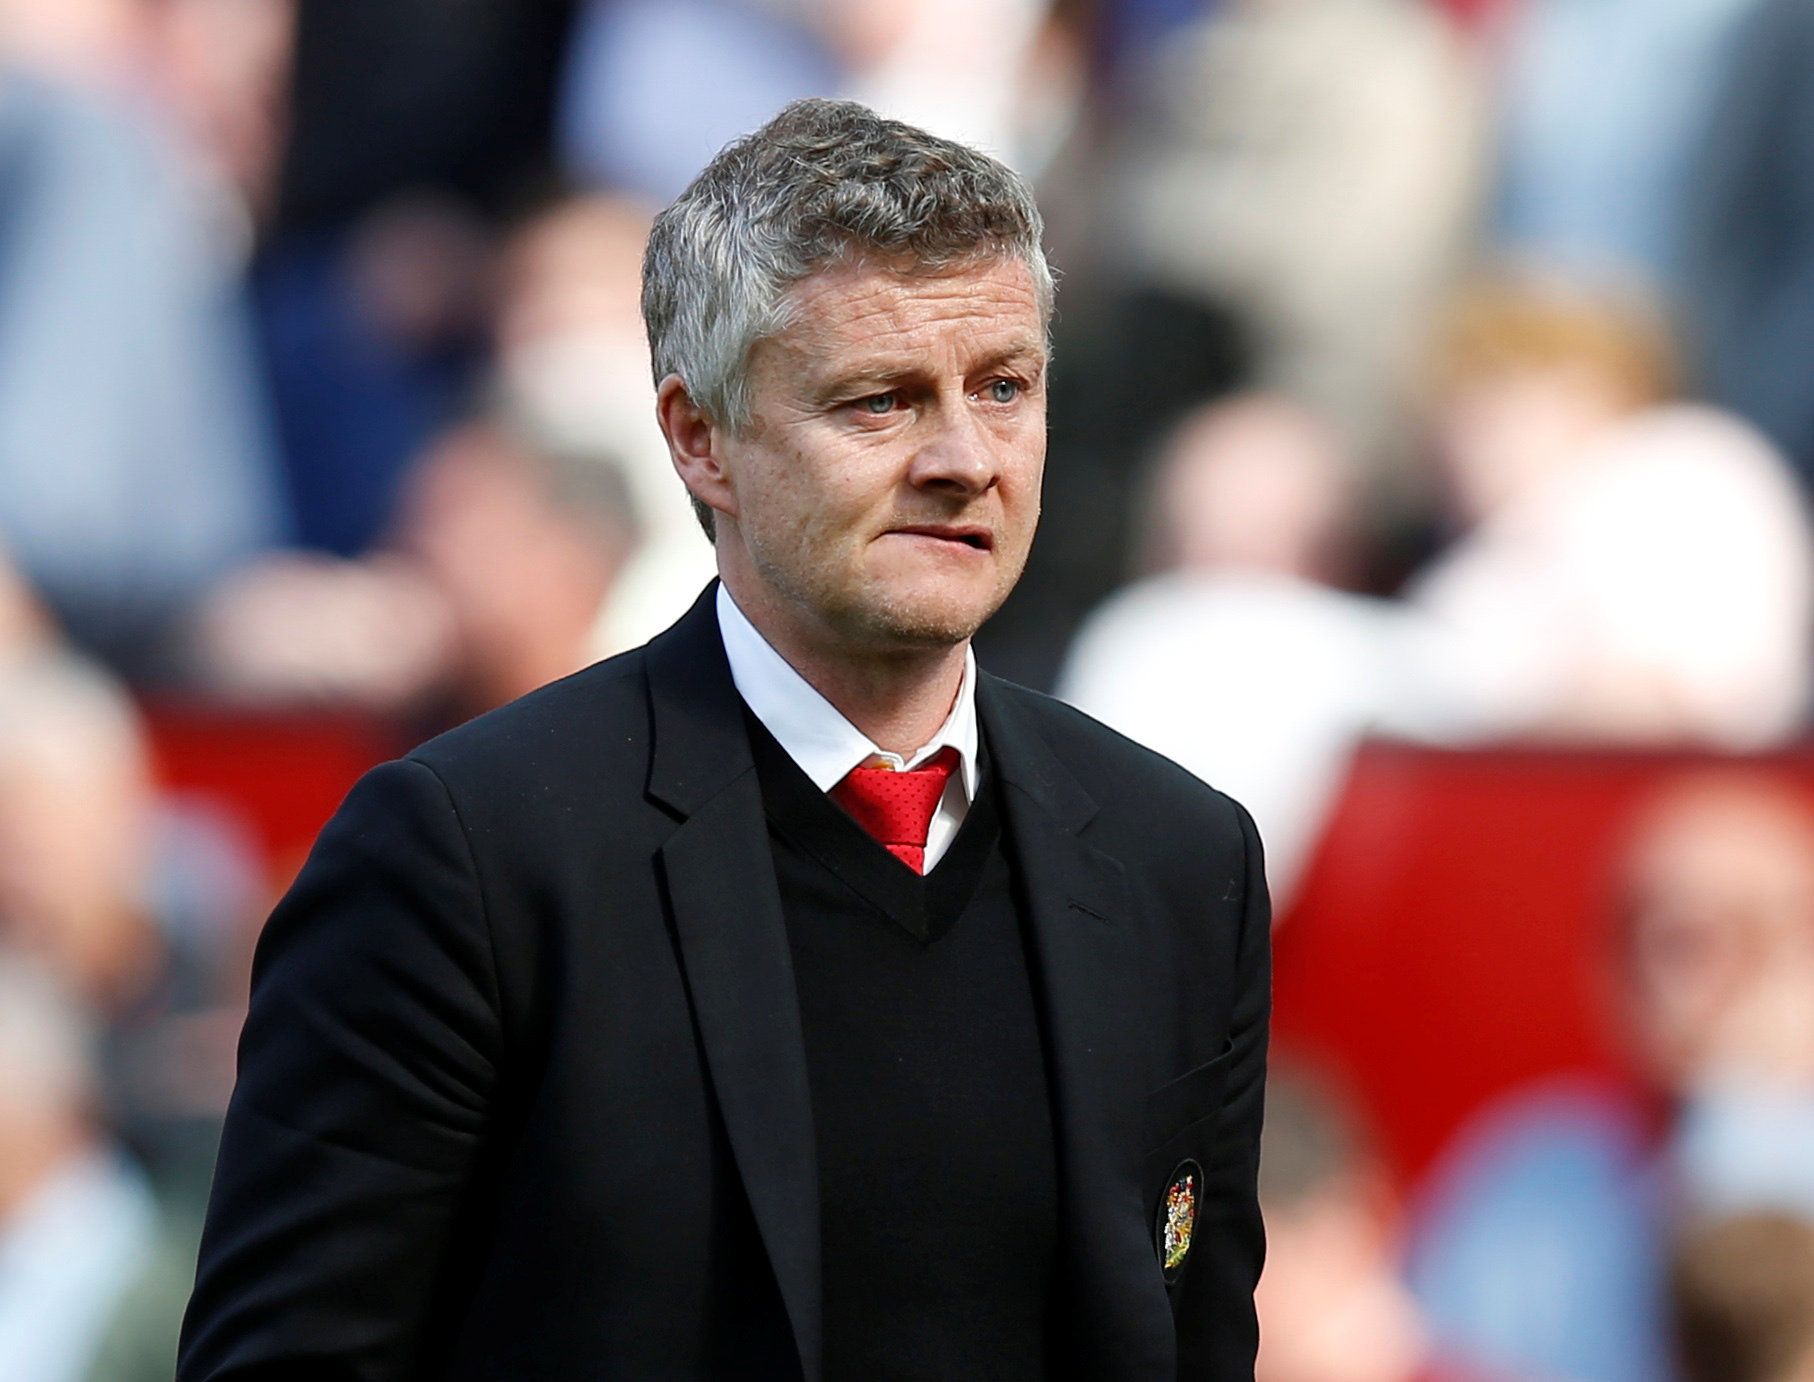 Soccer Football - Premier League - Manchester United v Cardiff City - Old Trafford, Manchester, Britain - May 12, 2019  Manchester United manager Ole Gunnar Solskjaer reacts during the match      REUTERS/Andrew Yates  EDITORIAL USE ONLY. No use with unauthorized audio, video, data, fixture lists, club/league logos or "live" services. Online in-match use limited to 75 images, no video emulation. No use in betting, games or single club/league/player publications.  Please contact your account repre